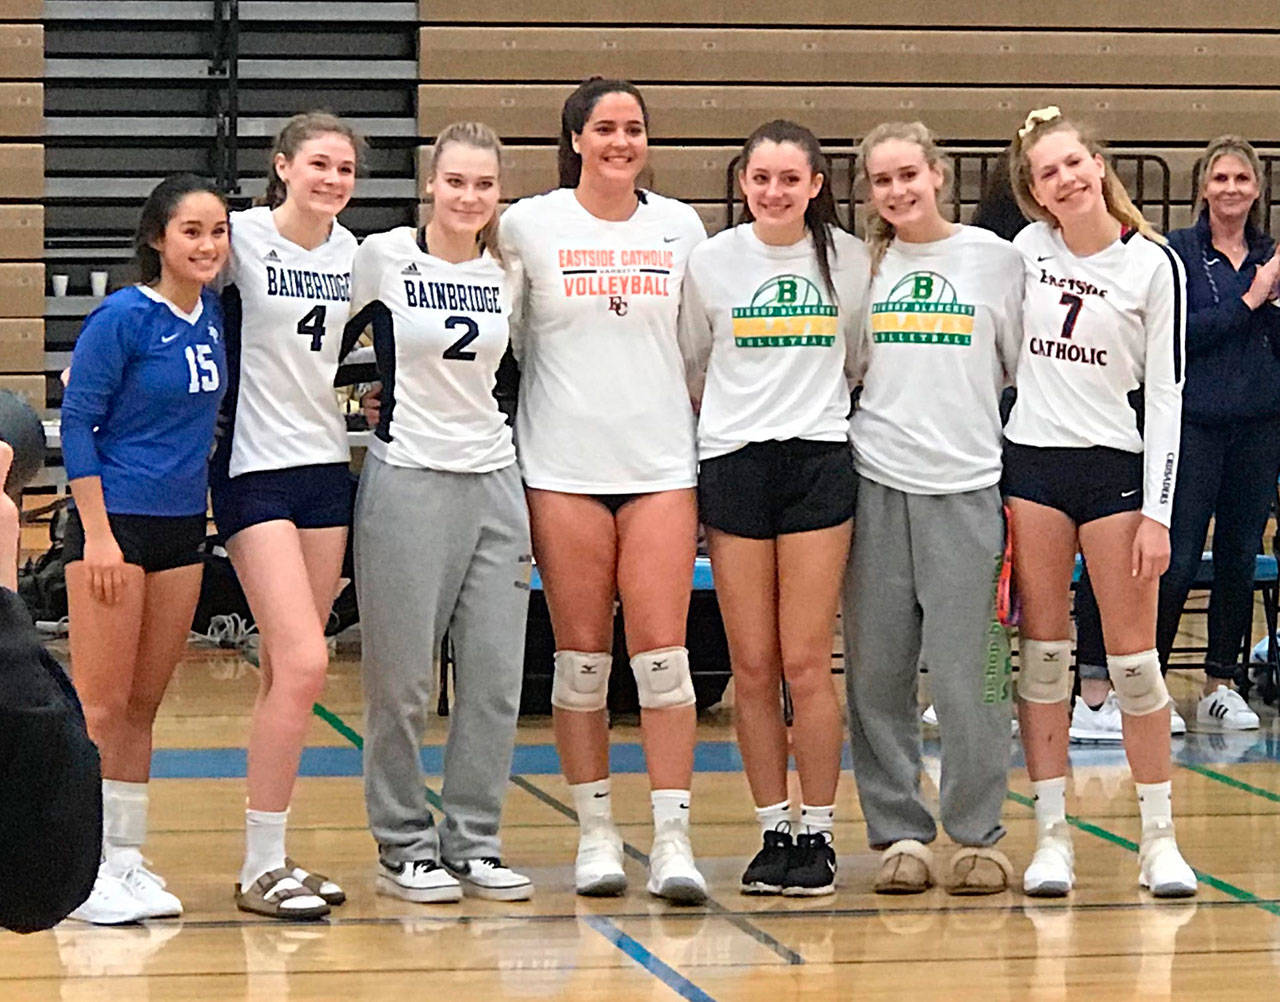 Paige Bouma and Rebecca Roman, second and third from left, earned post-season Metro League honors in volleyball. (Photo courtesy of Dominique Atherley)